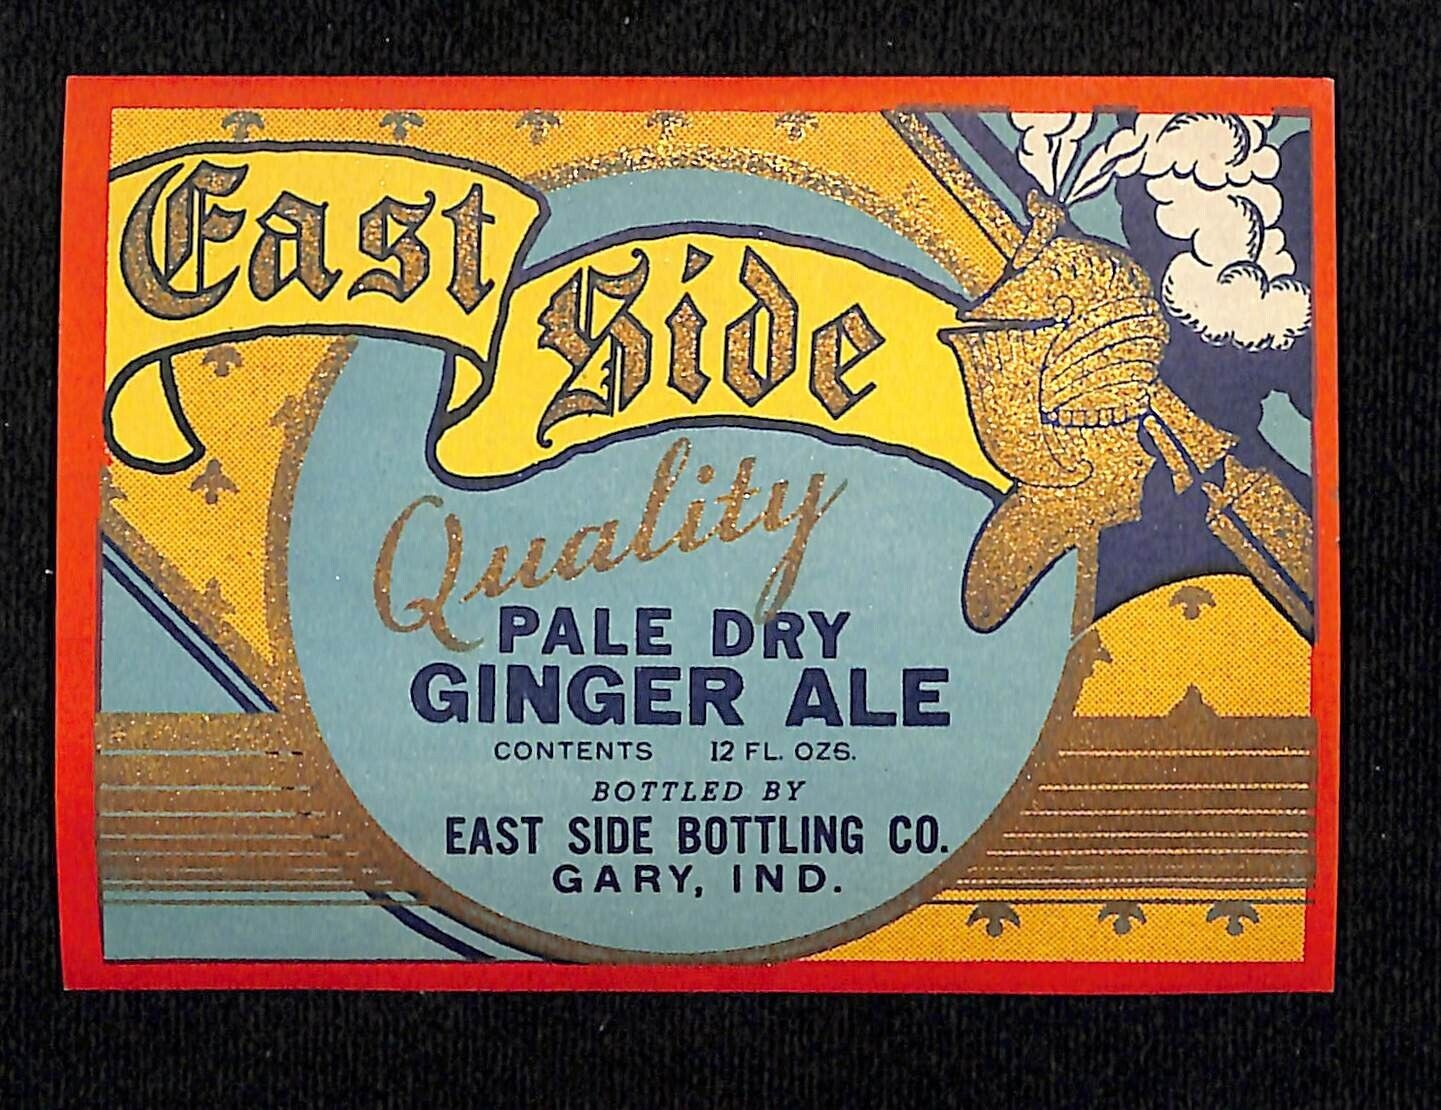 East Side Ginger Ale Gary, IN c1940's-50's Knight Armour Gold Ink VGC Scarce